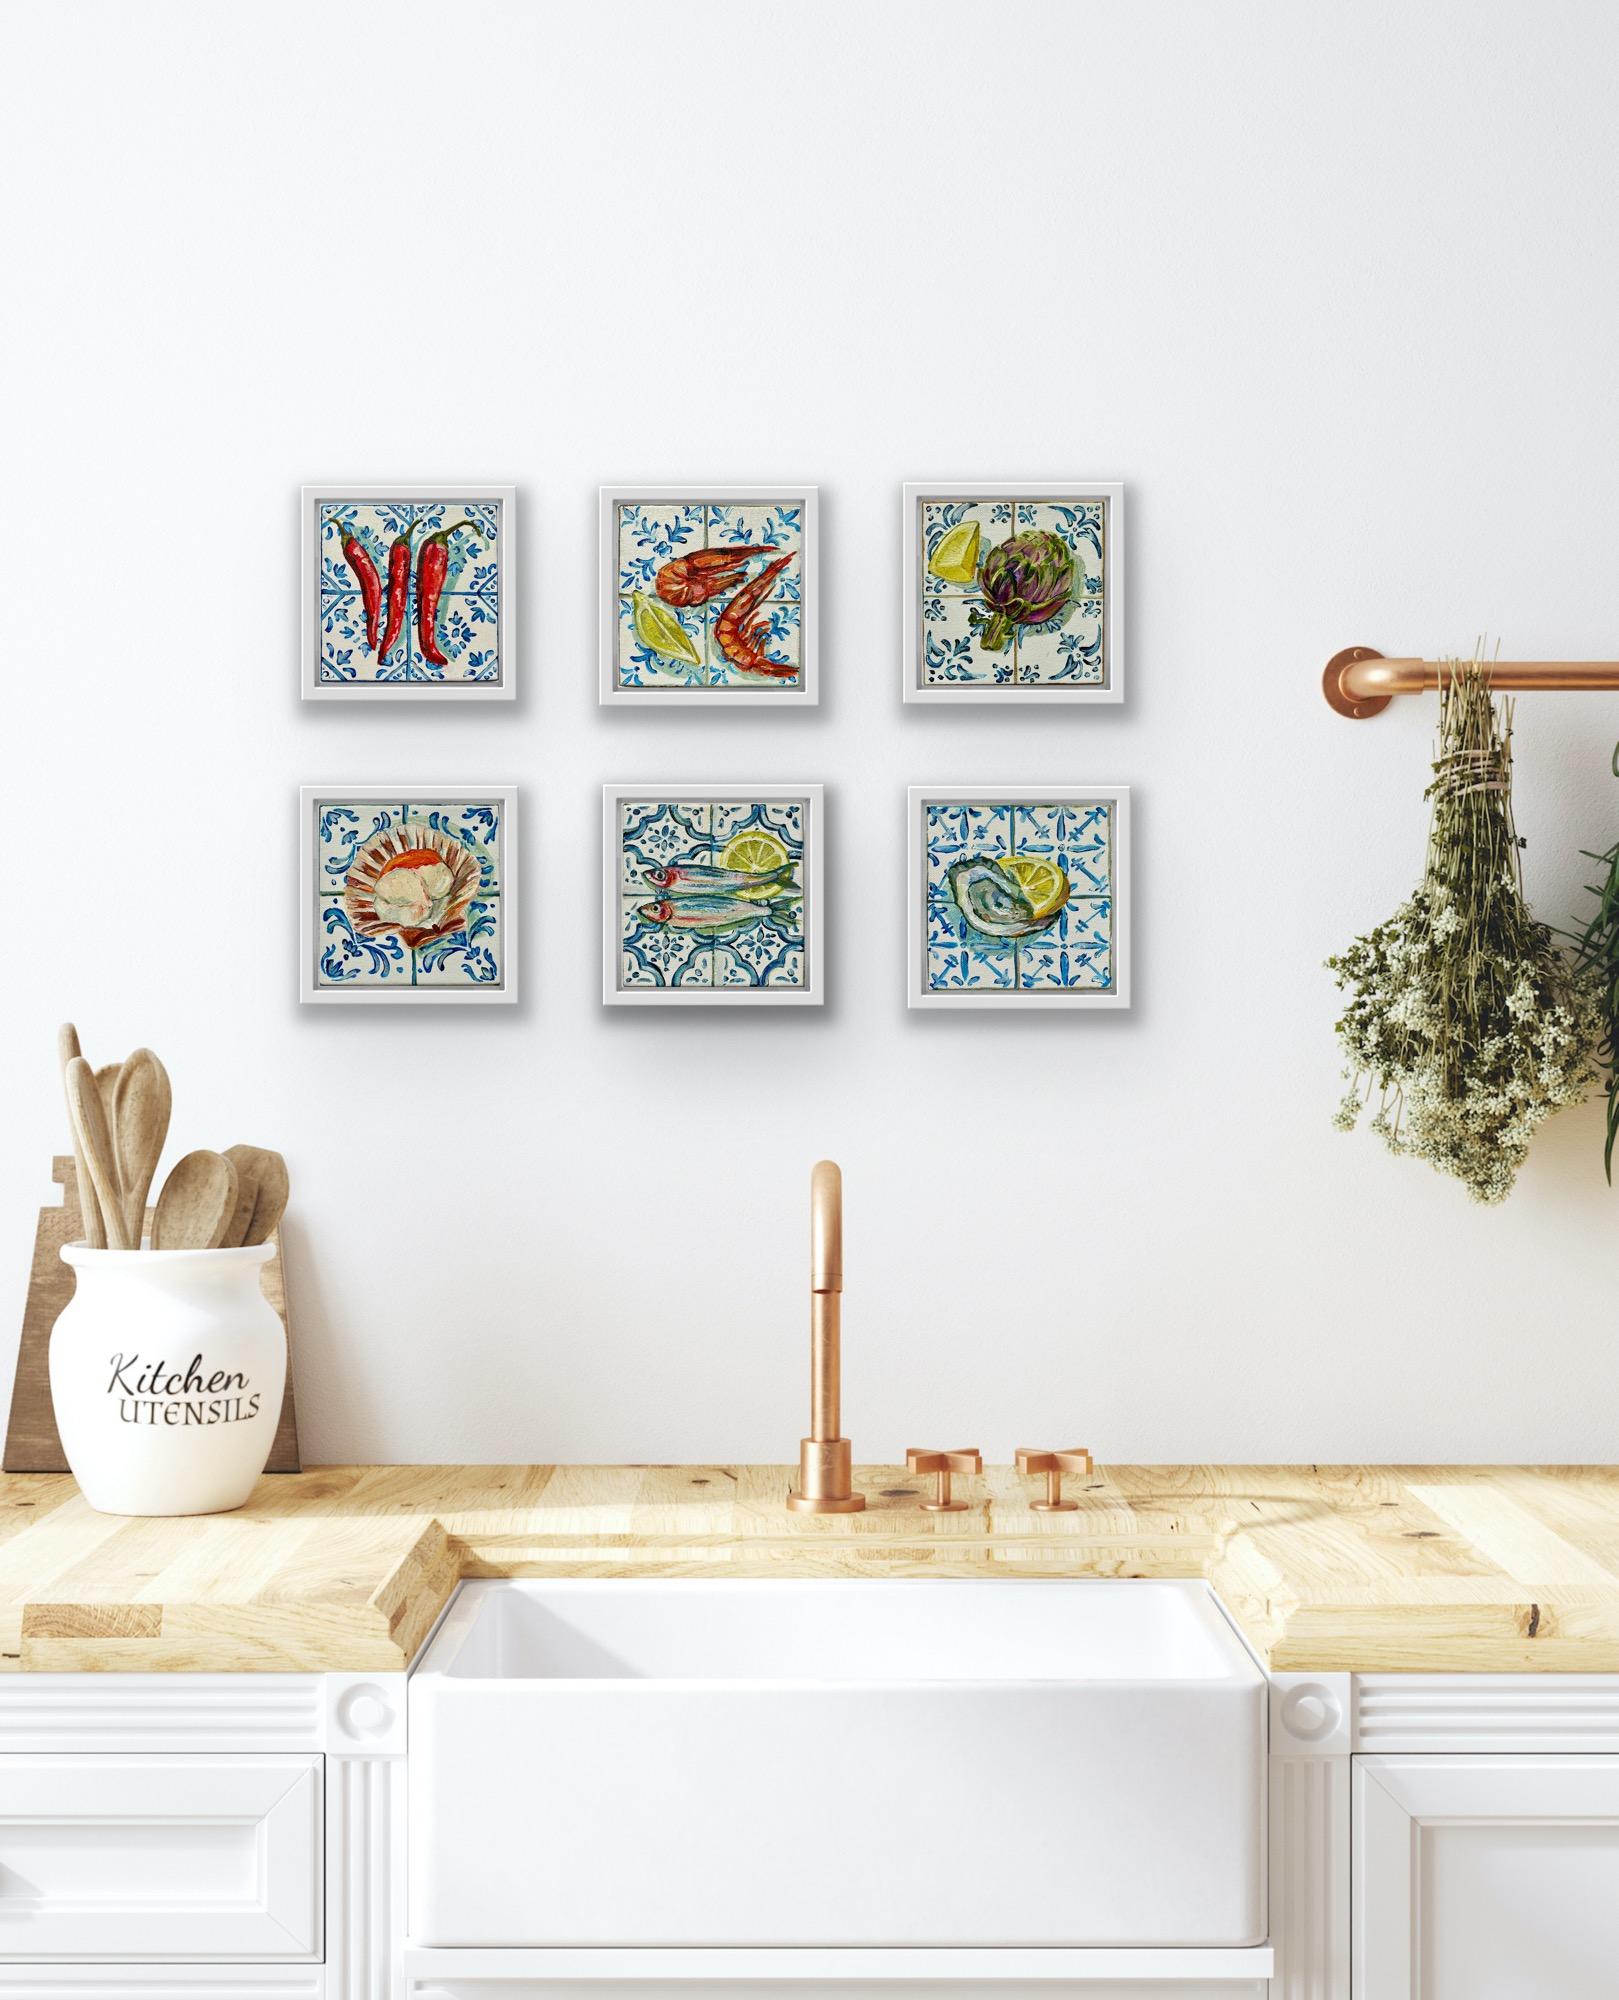 My Mini Tile Series depicts the spoils of a Mediterranean kitchen on a selection of blue and white Hispanic tiles. Hung together these original paintings aim to encapsulate the richness of a Southern European pantry. They are vibrant still life